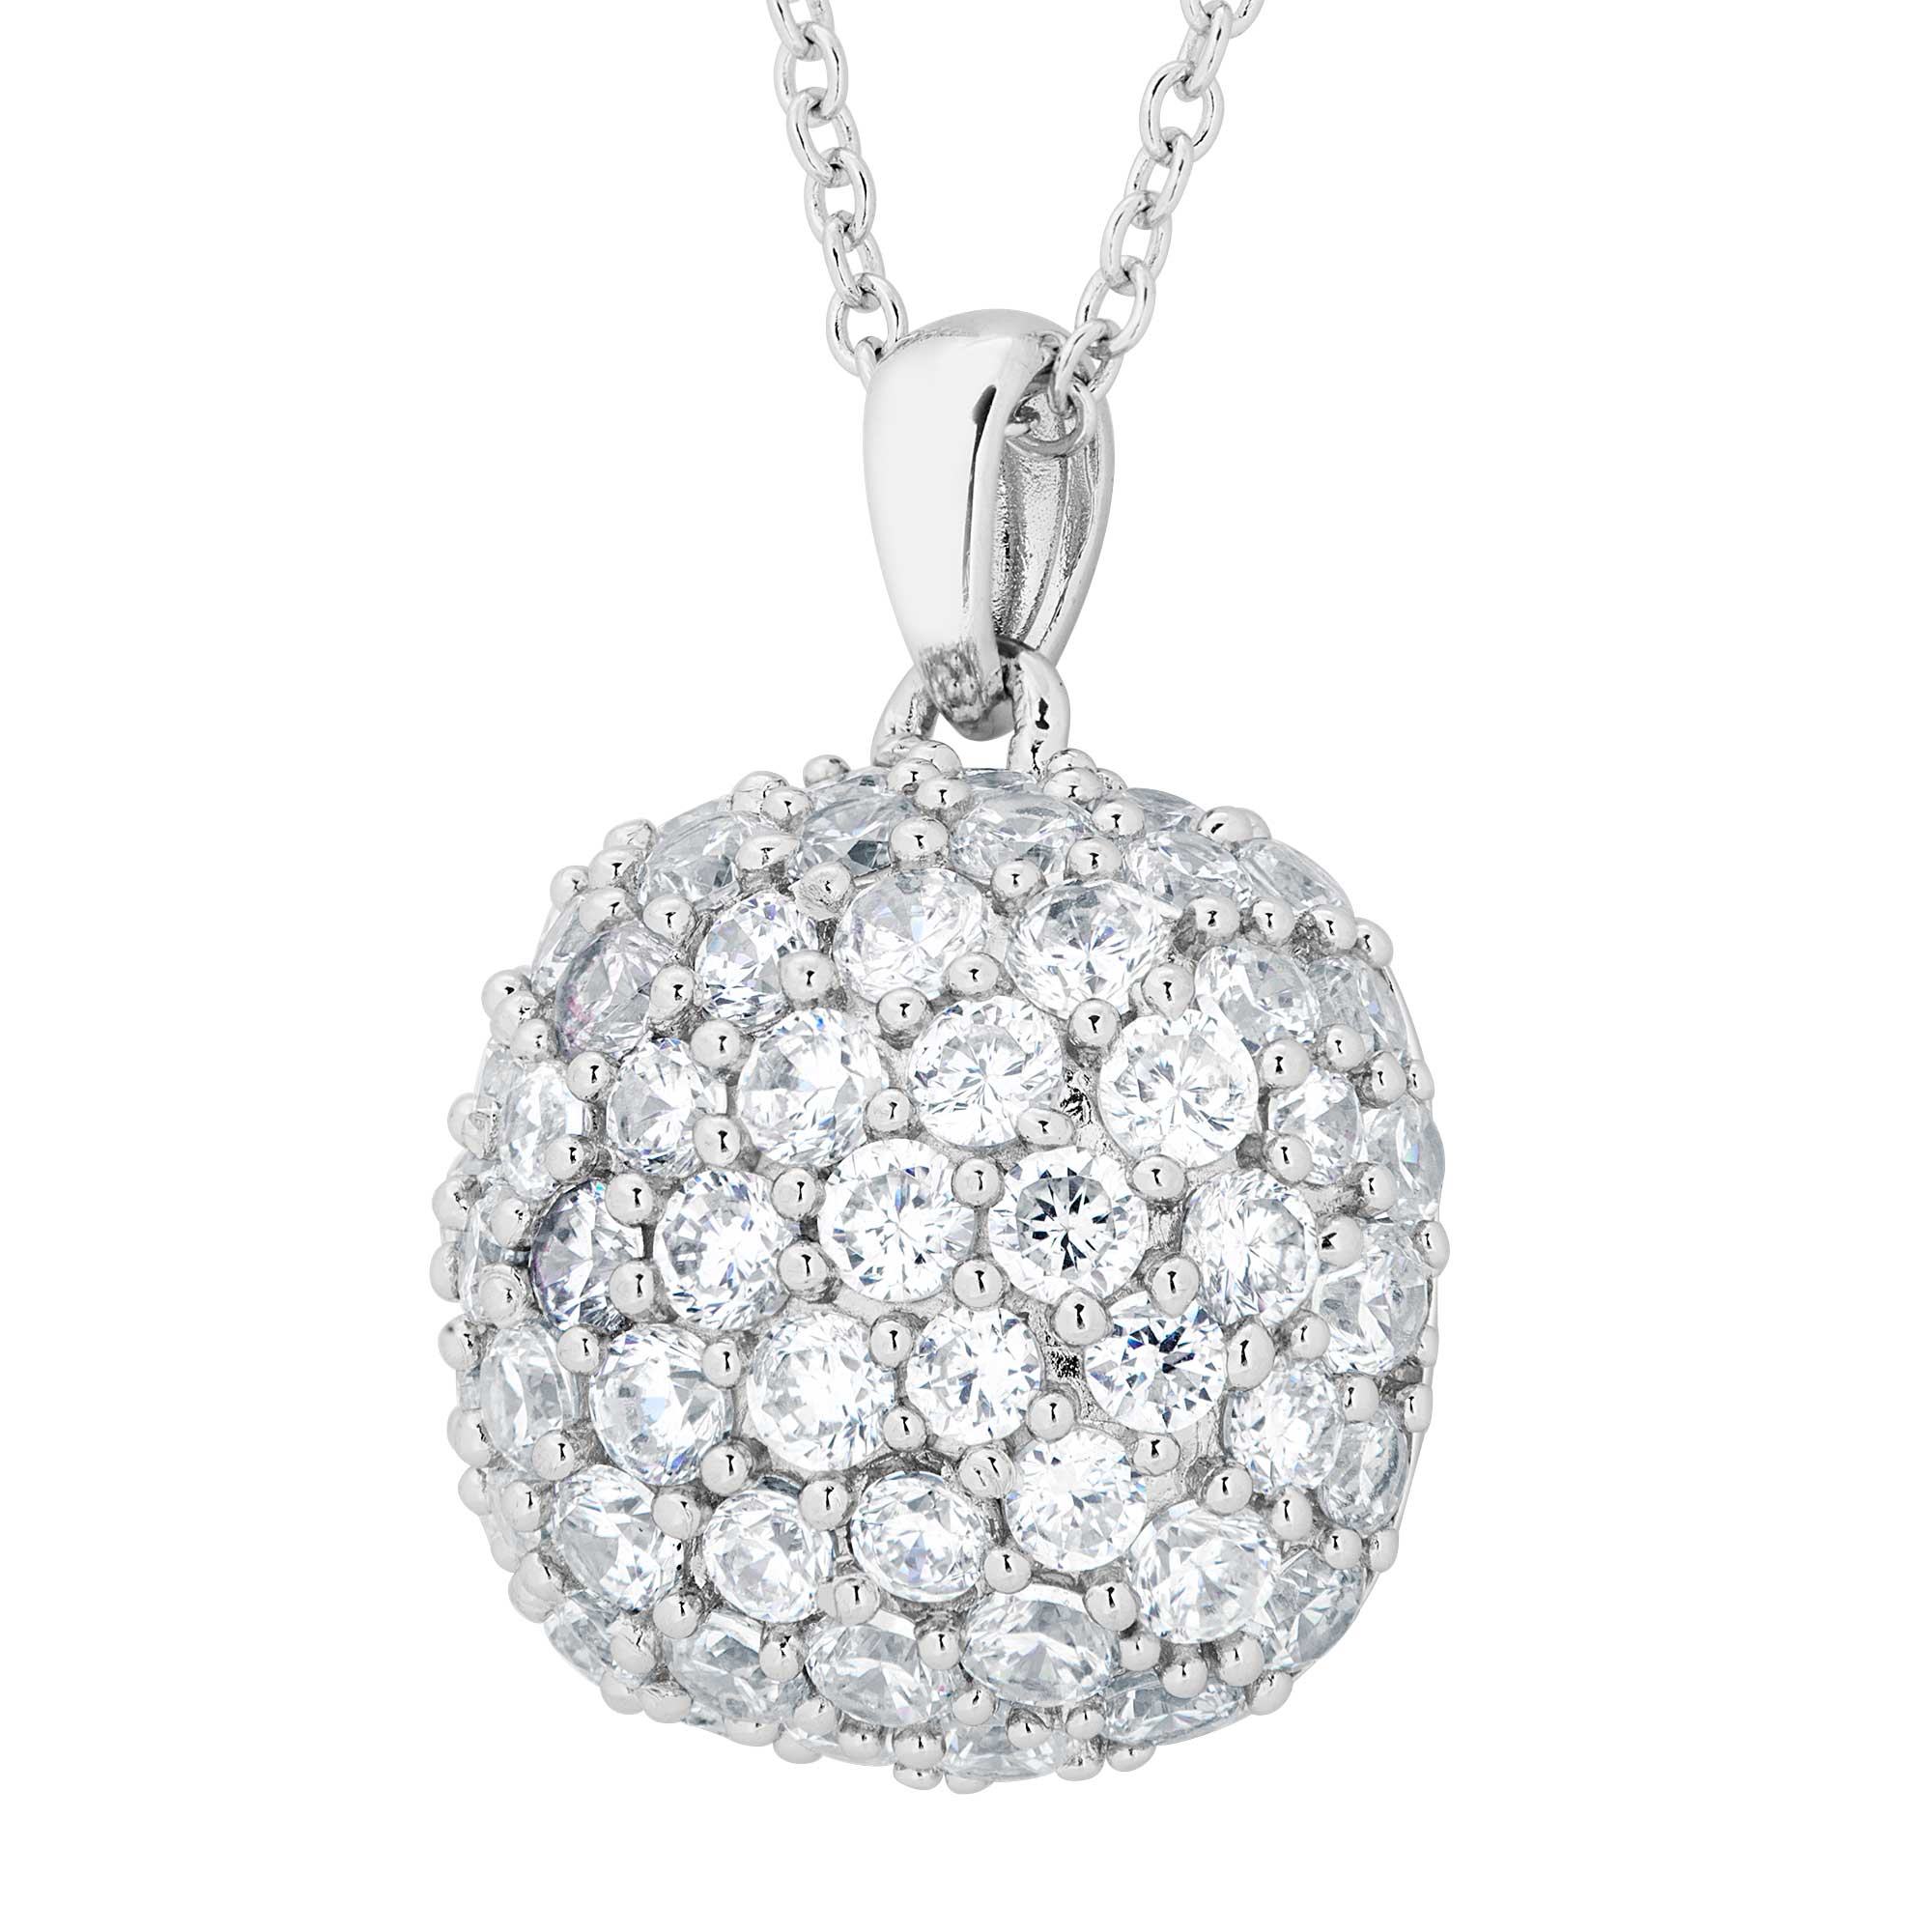 Dome Round Cubic Zirconia Pendant Necklace, Rhodium Plated Sterling Silver, 18